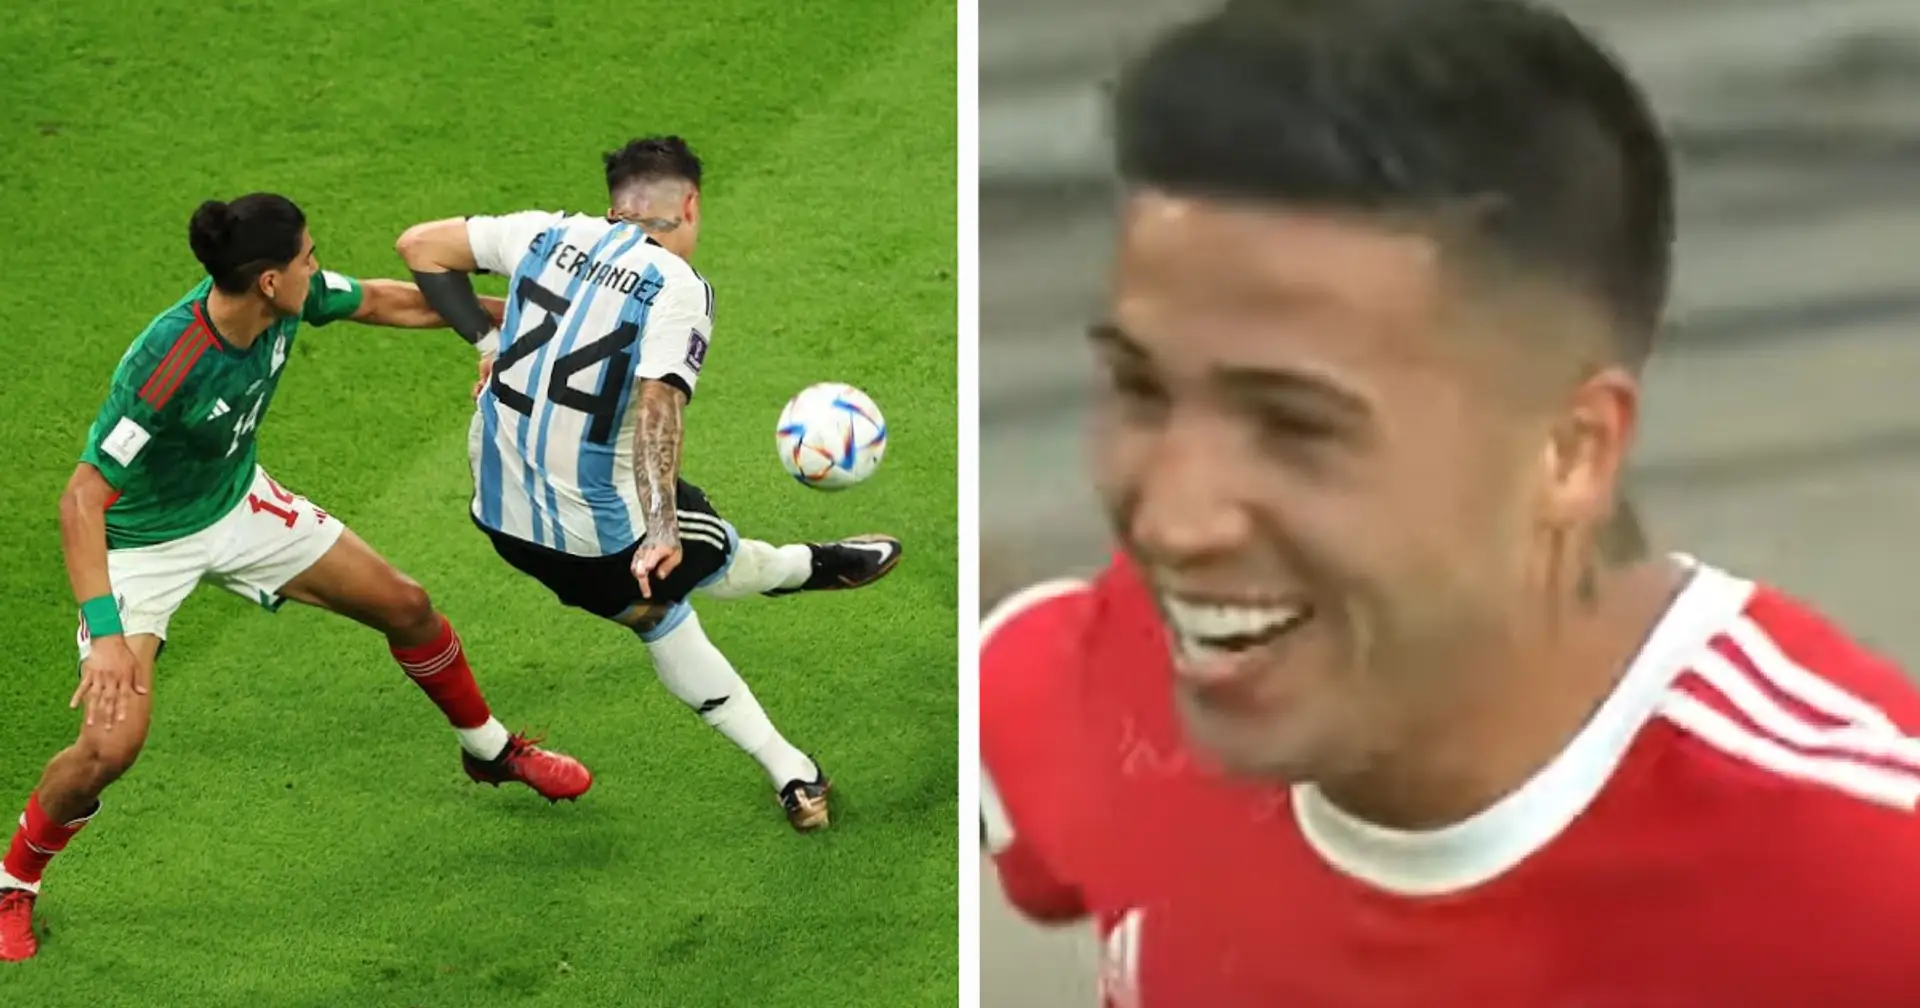 'Bring me this guy': Fans urge Klopp to sign midfielder who forced his way into Argentina starting XI 